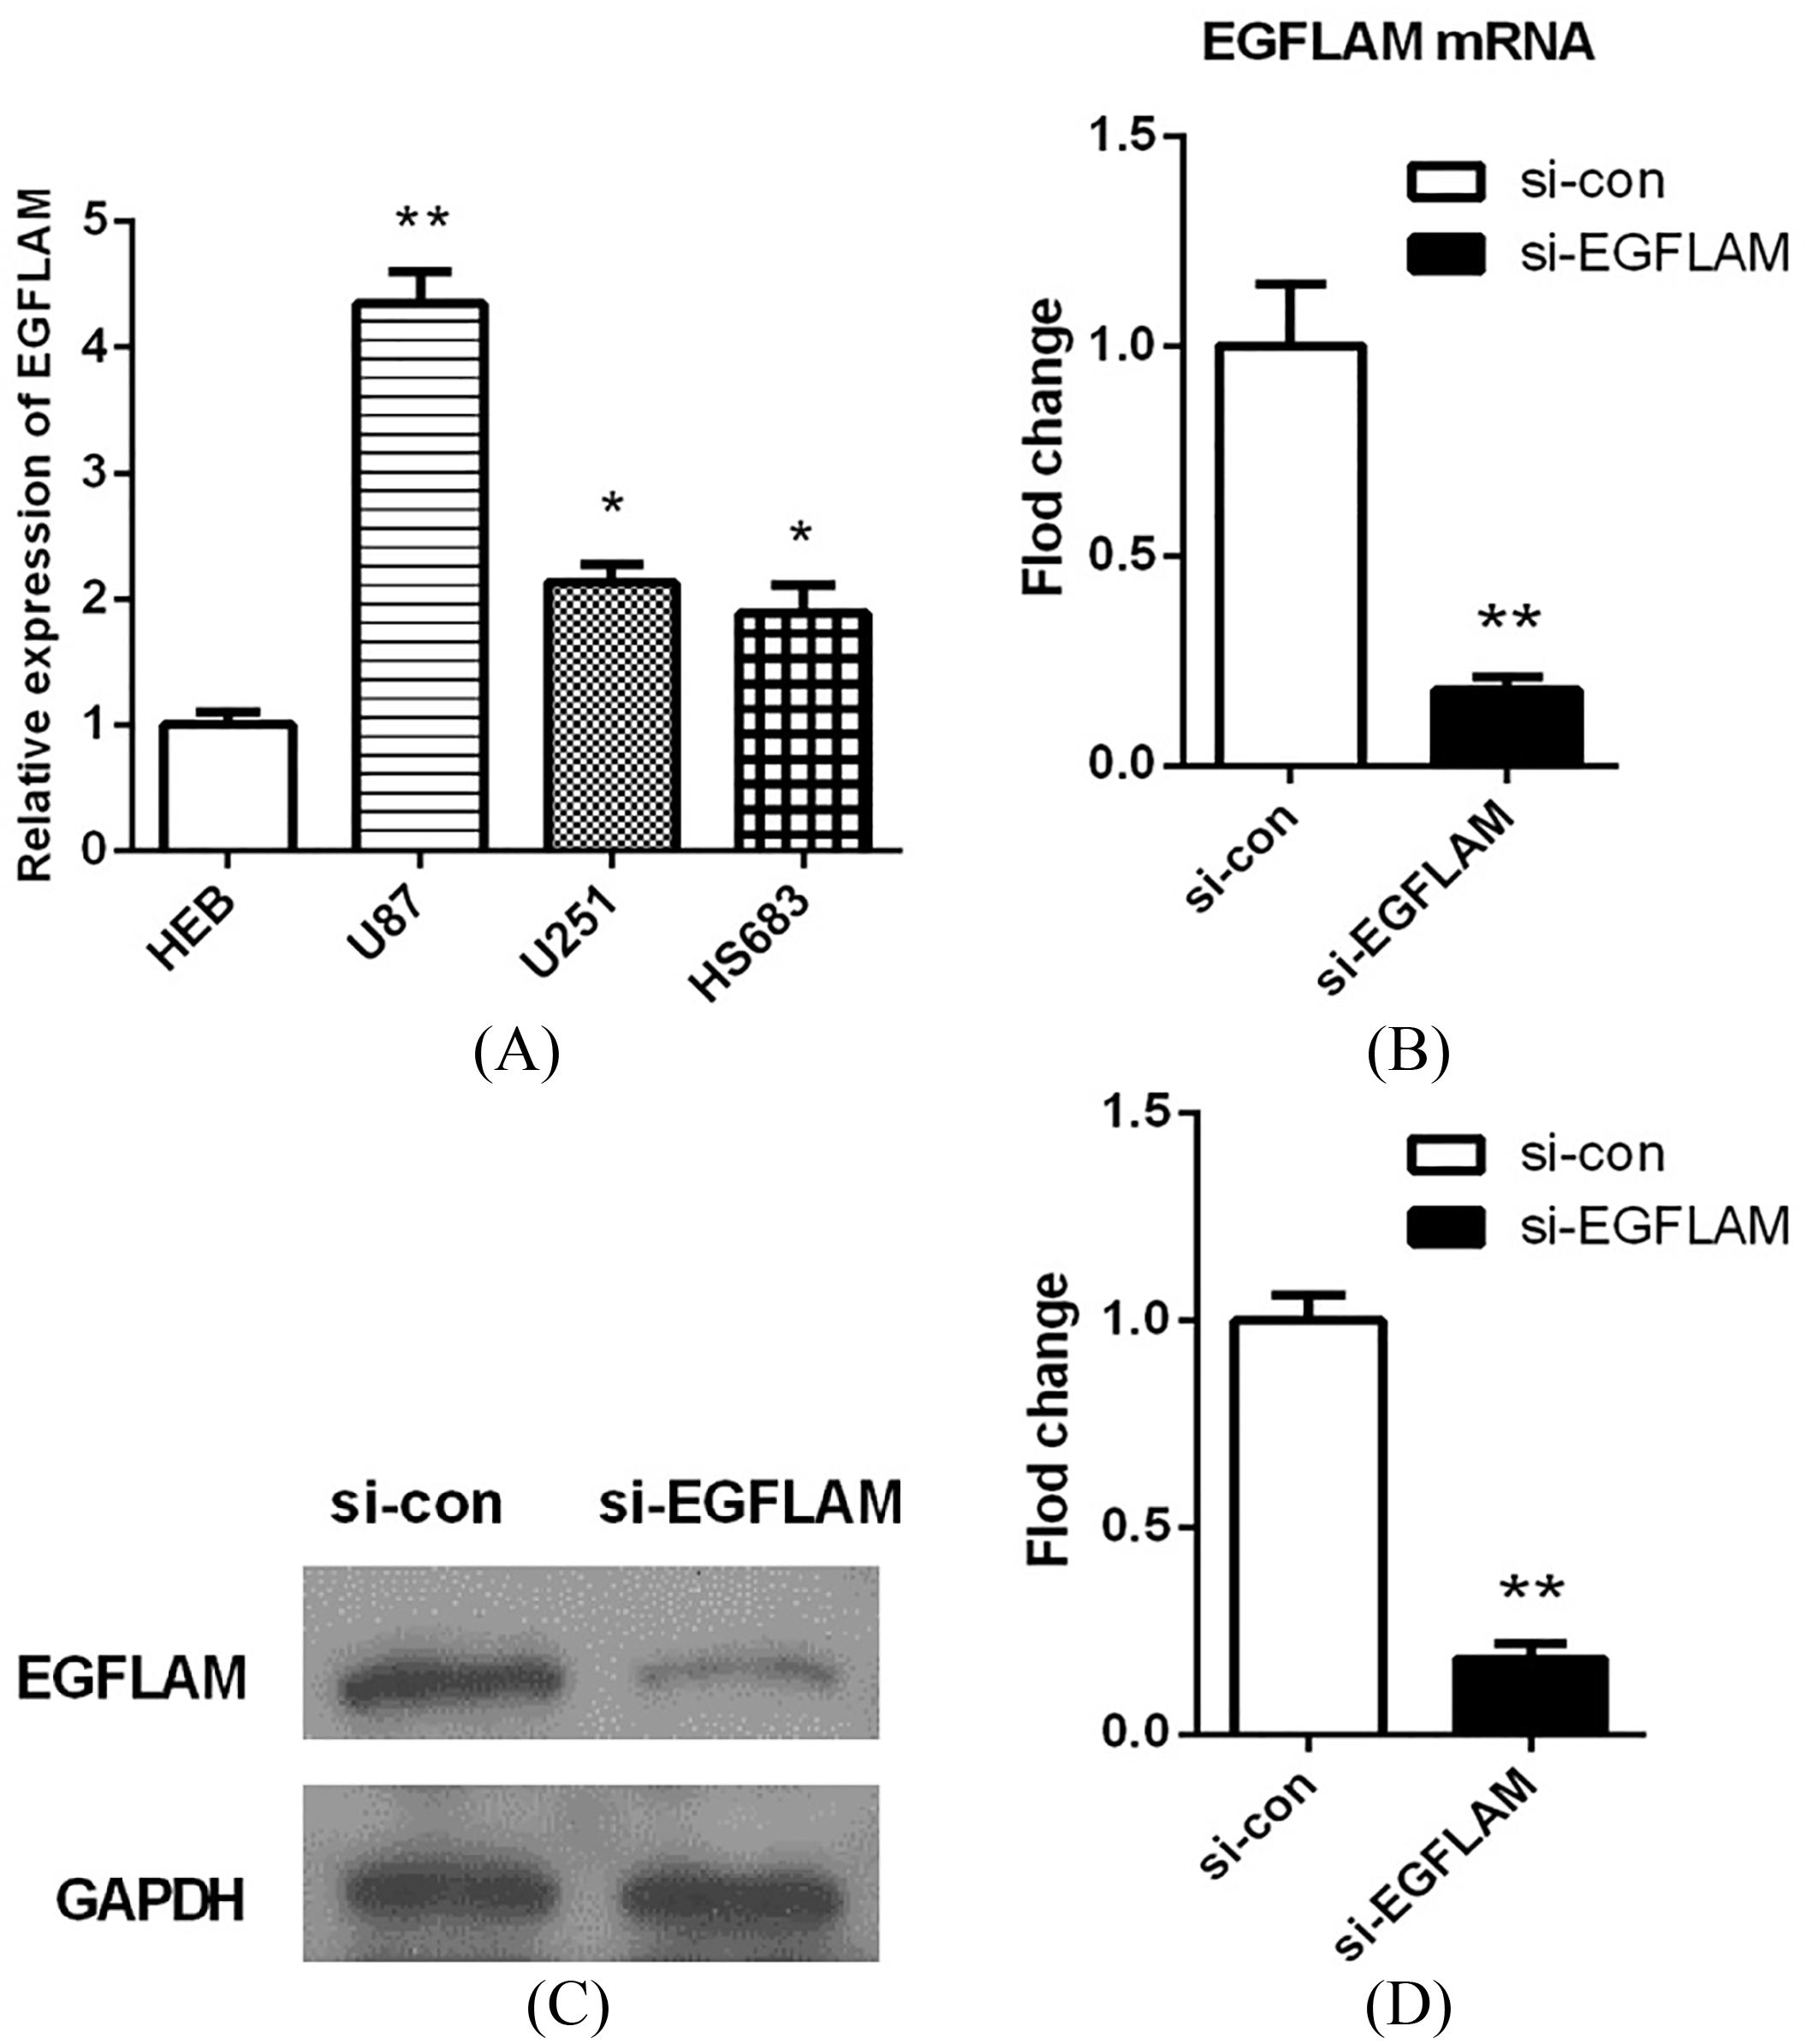 EGFLAM expression was up-regulated in GBM cells. (A) The expression levels of EGFLAM in HEB, U87, U251, HS683 cell lines were analyzed by qRT-PCR, among which U87 cell line was chosen as appropriate cellular models to knockdown EGFLAM for further experiments. (B–D) After transfection, EGFLAM expression was measured by qRT-PCR (B) and western blot (C and D) respectively. si-EGFLAM group represents EGFLAM in U87 cells were silenced, and si-con group represents EGFLAM in U87 cells were not silenced. *p< 0.05 and **p< 0.01 versus si-con group.